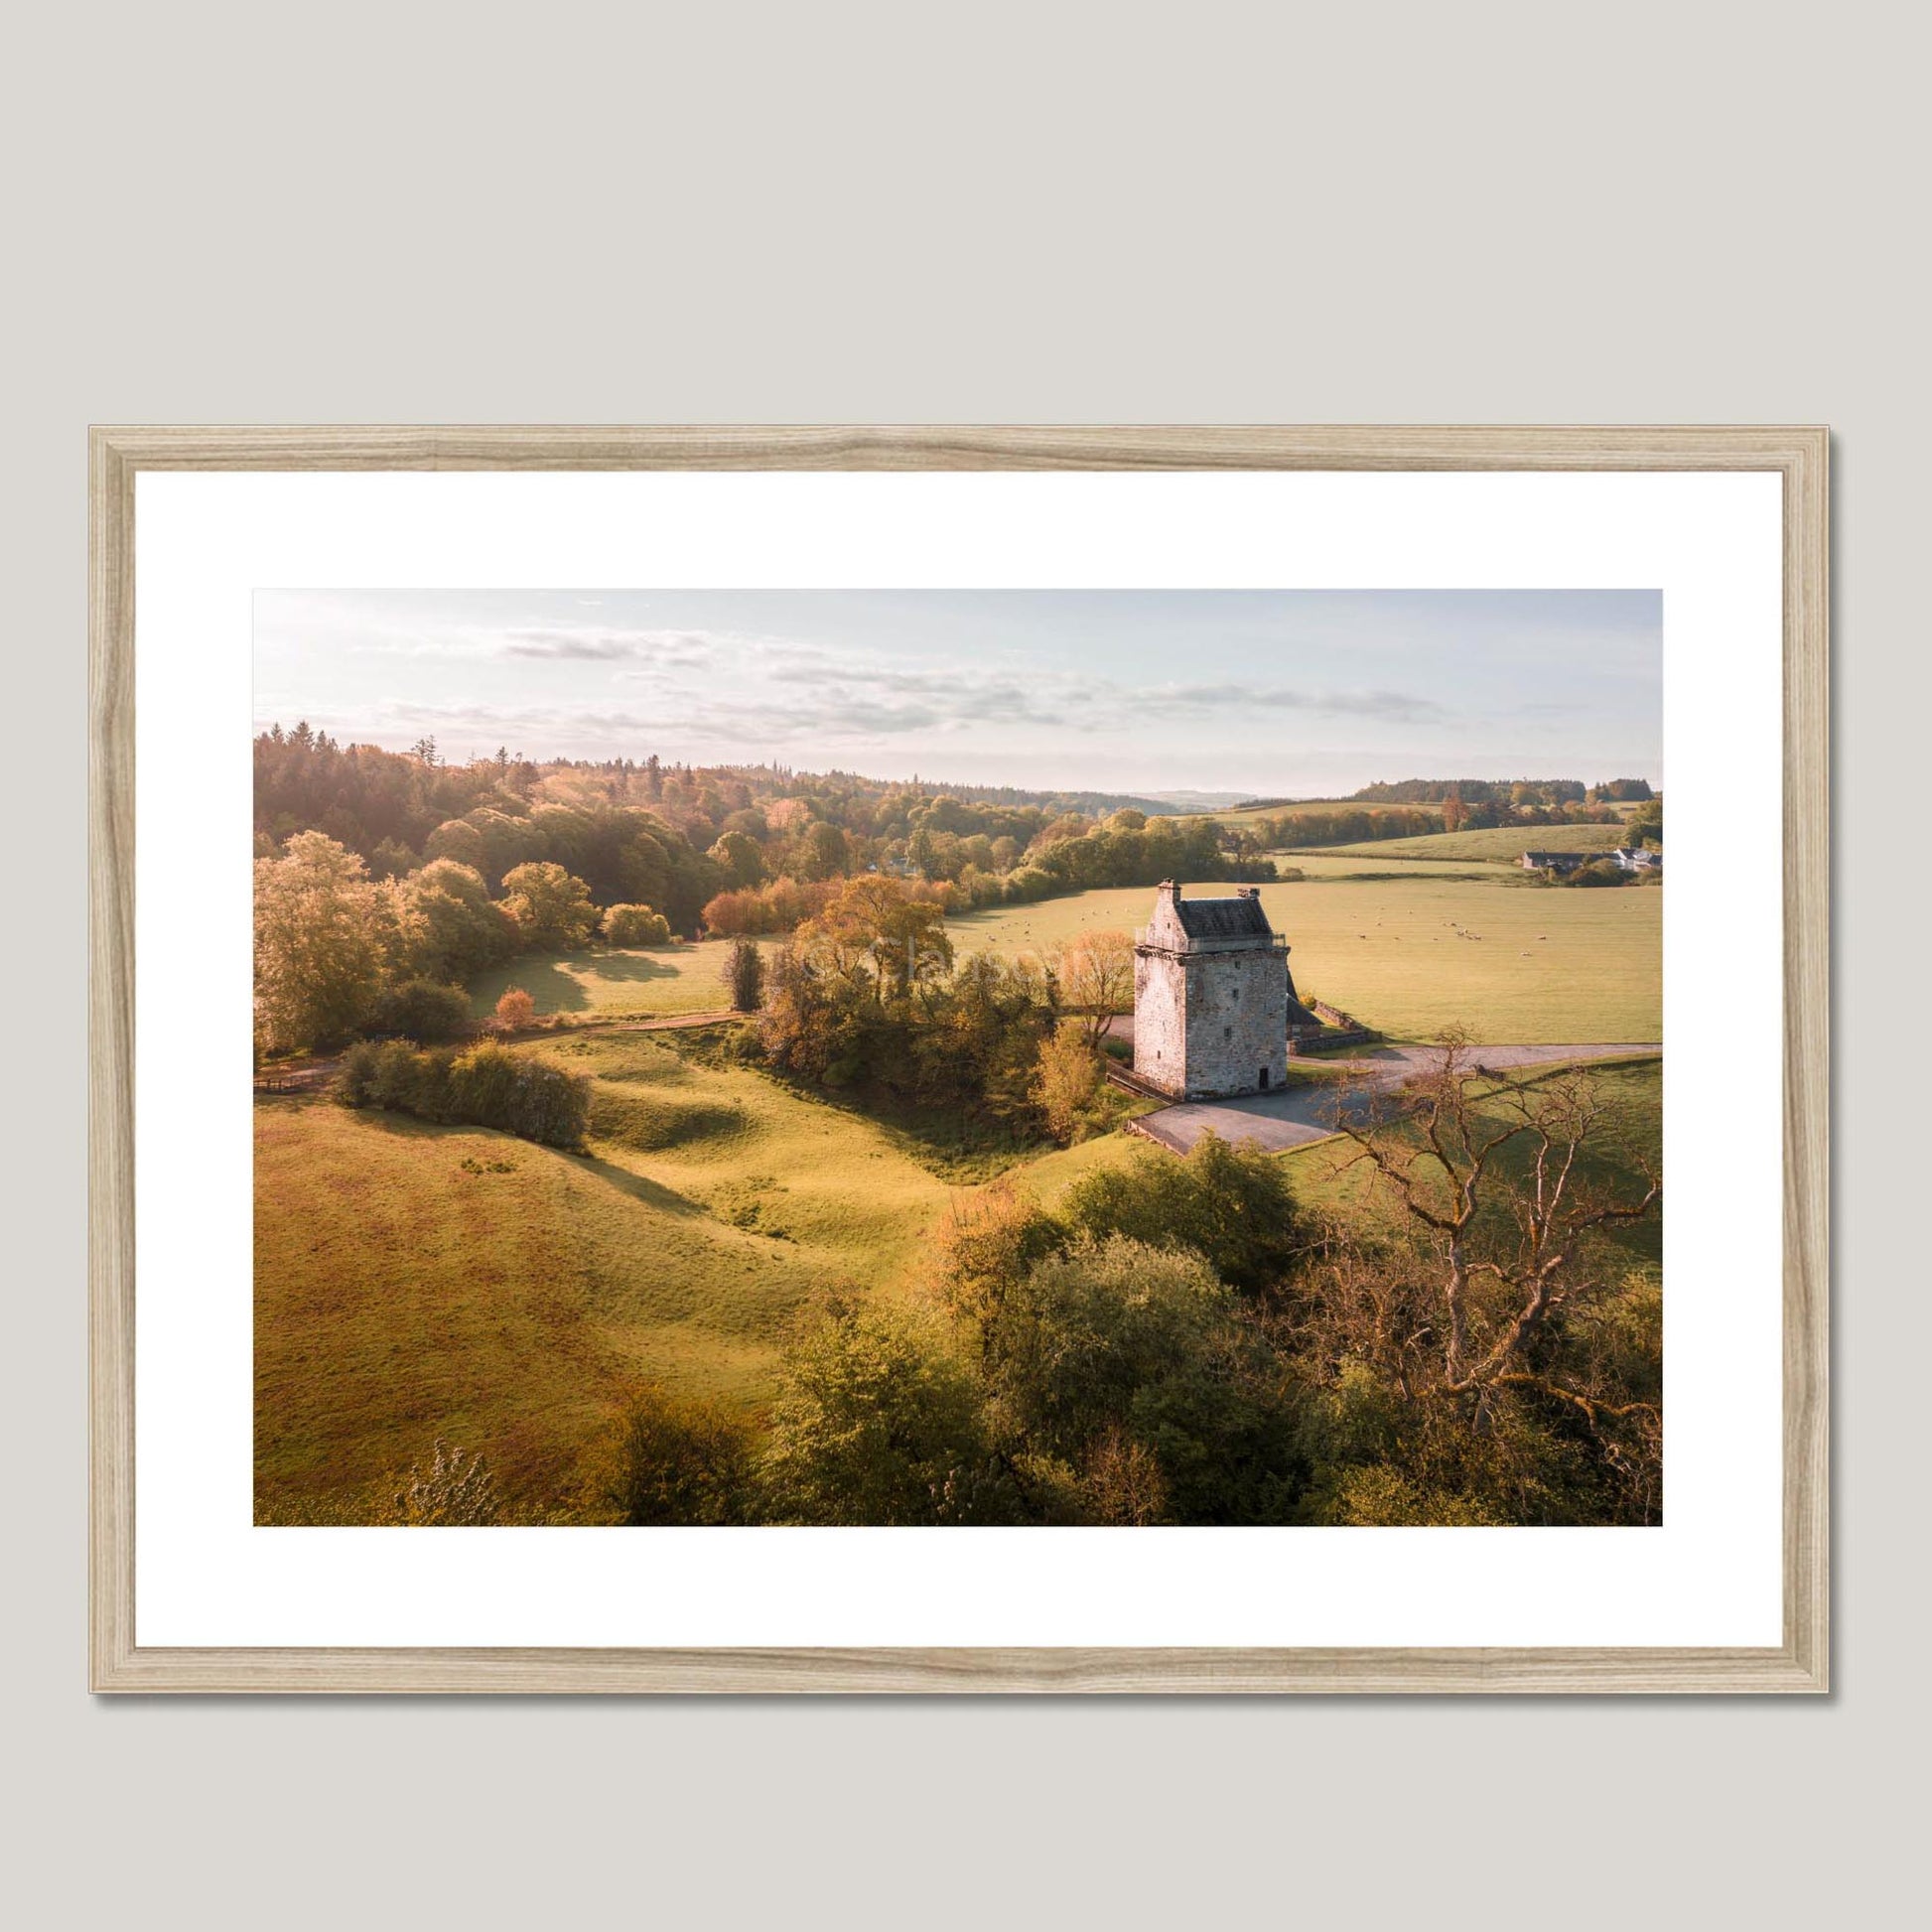 Clan Armstrong - Gilnockie Tower - Framed & Mounted Landscape Photography Print 28"x20" Natural